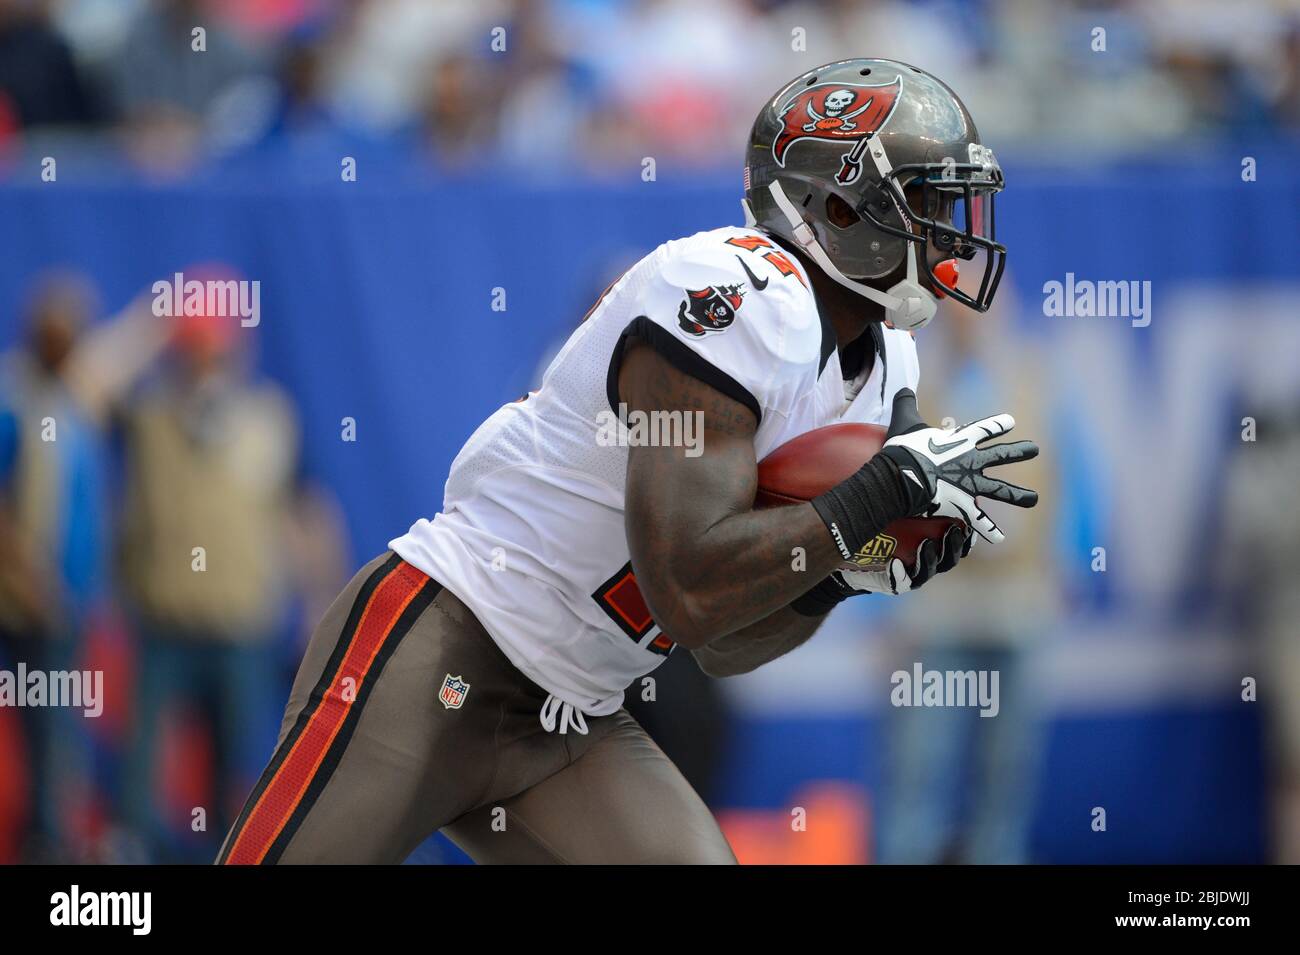 16 September 2012: Tampa Bay Buccaneers wide receiver Arrelious Benn (17) during a week 2 NFL NFC matchup between the Tampa Bay Buccaneers and New Yor Stock Photo